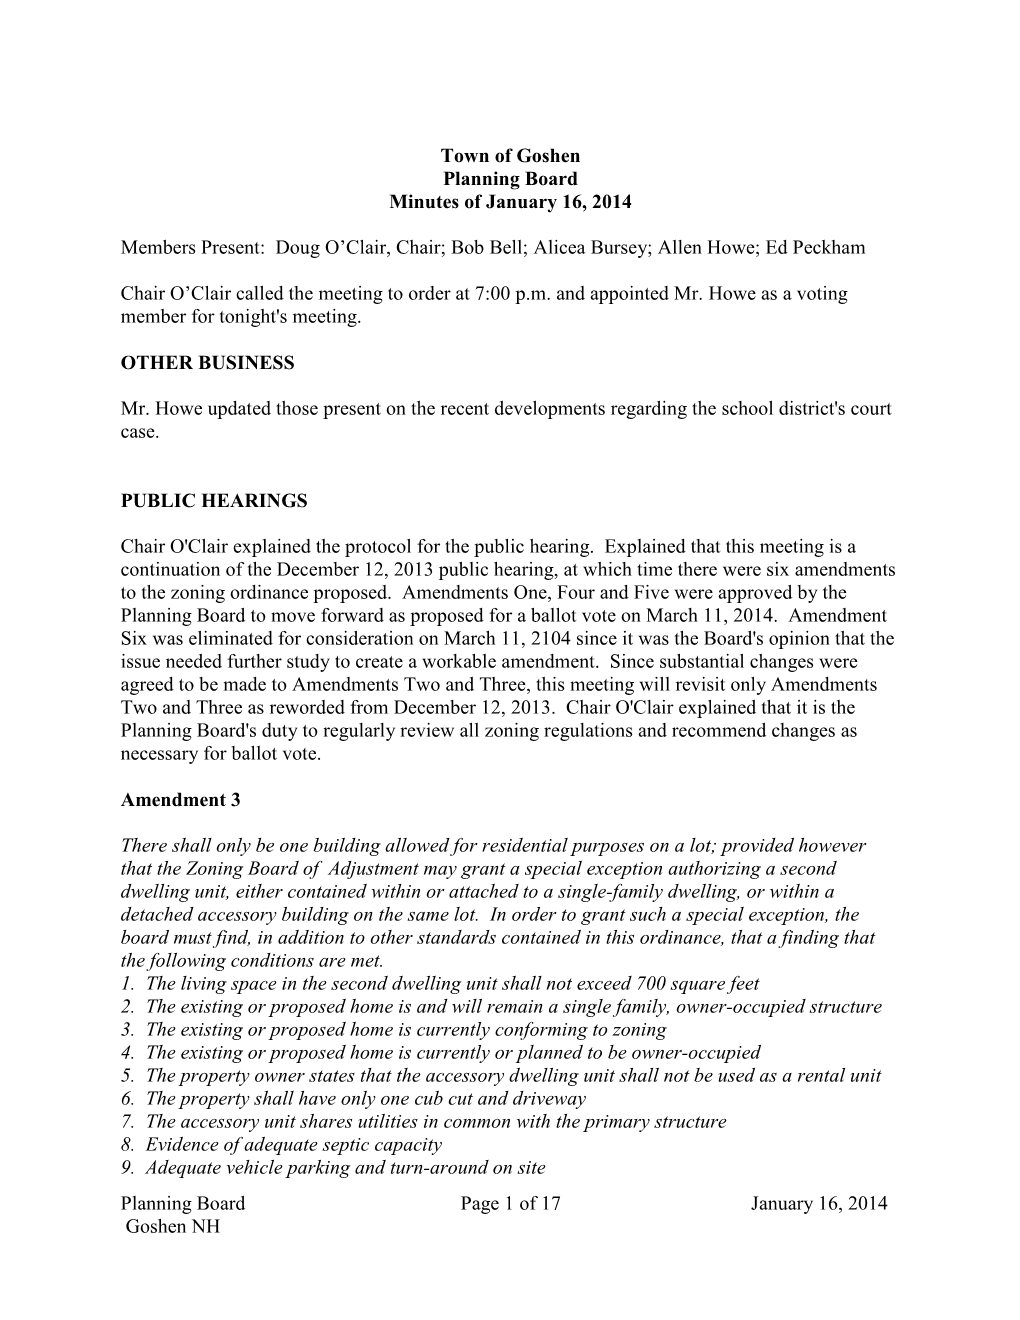 Planning Board Page 1 of 17 January 16, 2014 Goshen NH Town Of